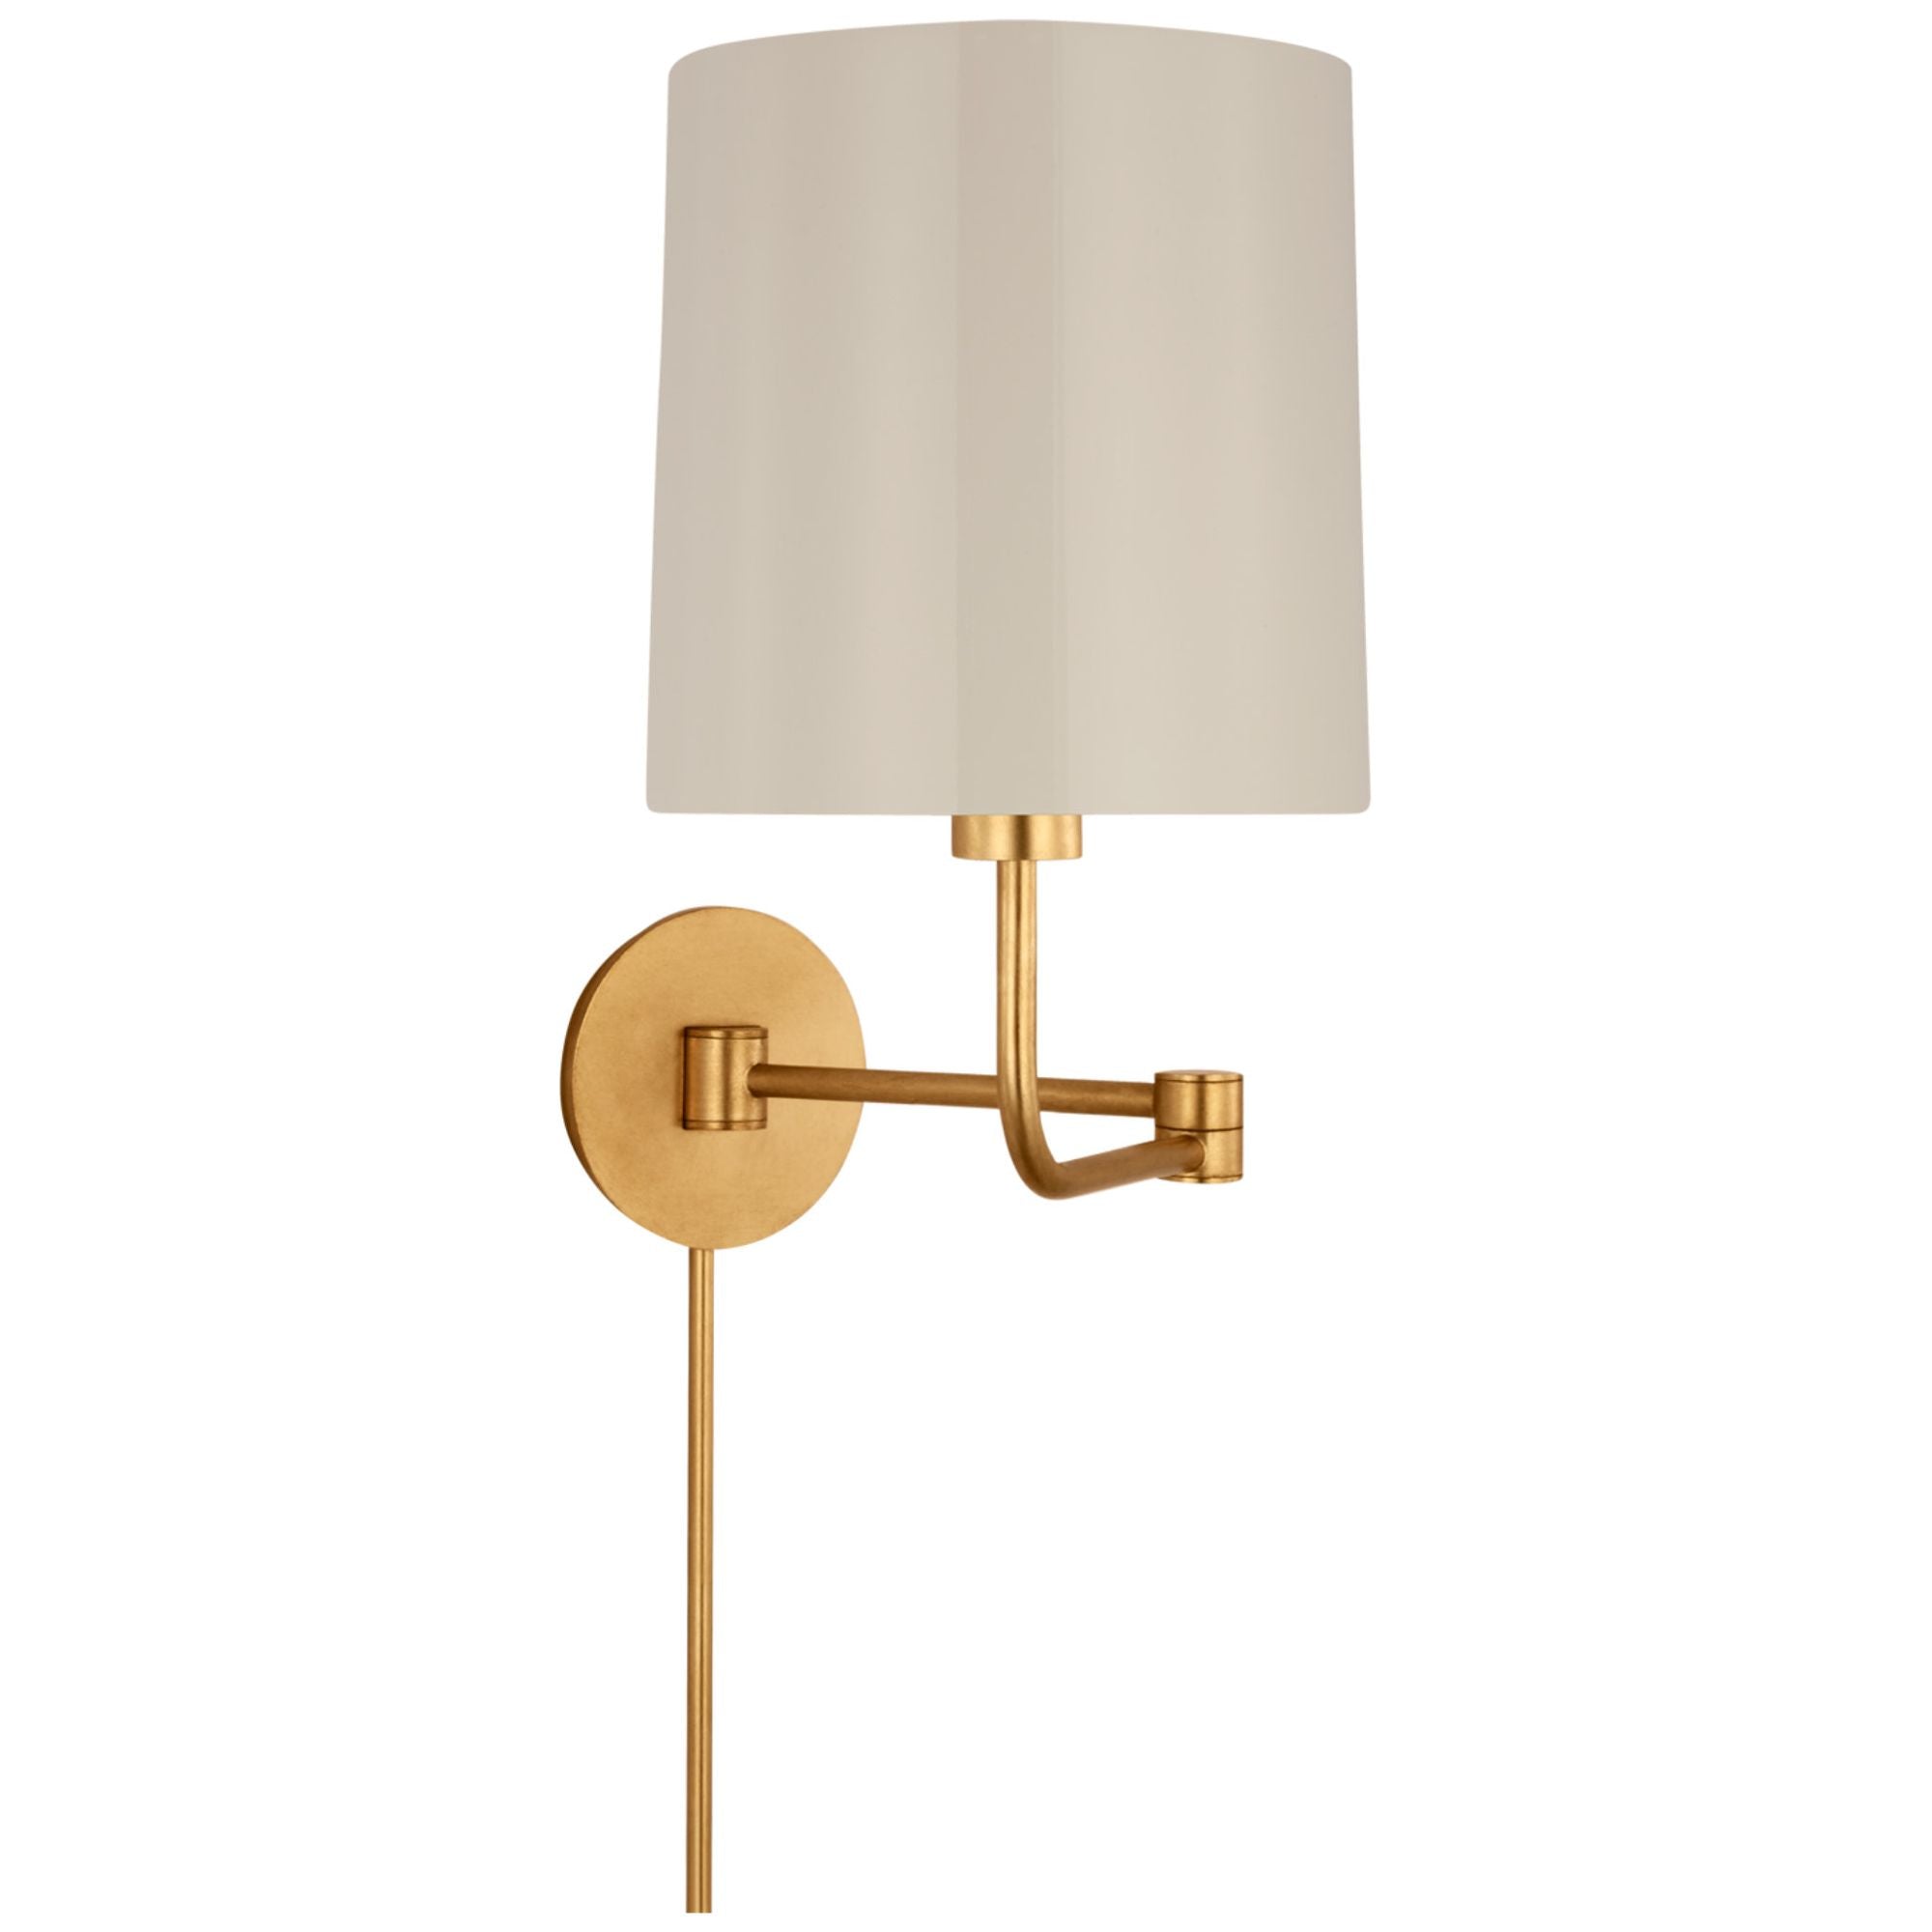 Barbara Barry Go Lightly Swing Arm Wall Light in Gild with China White Shade